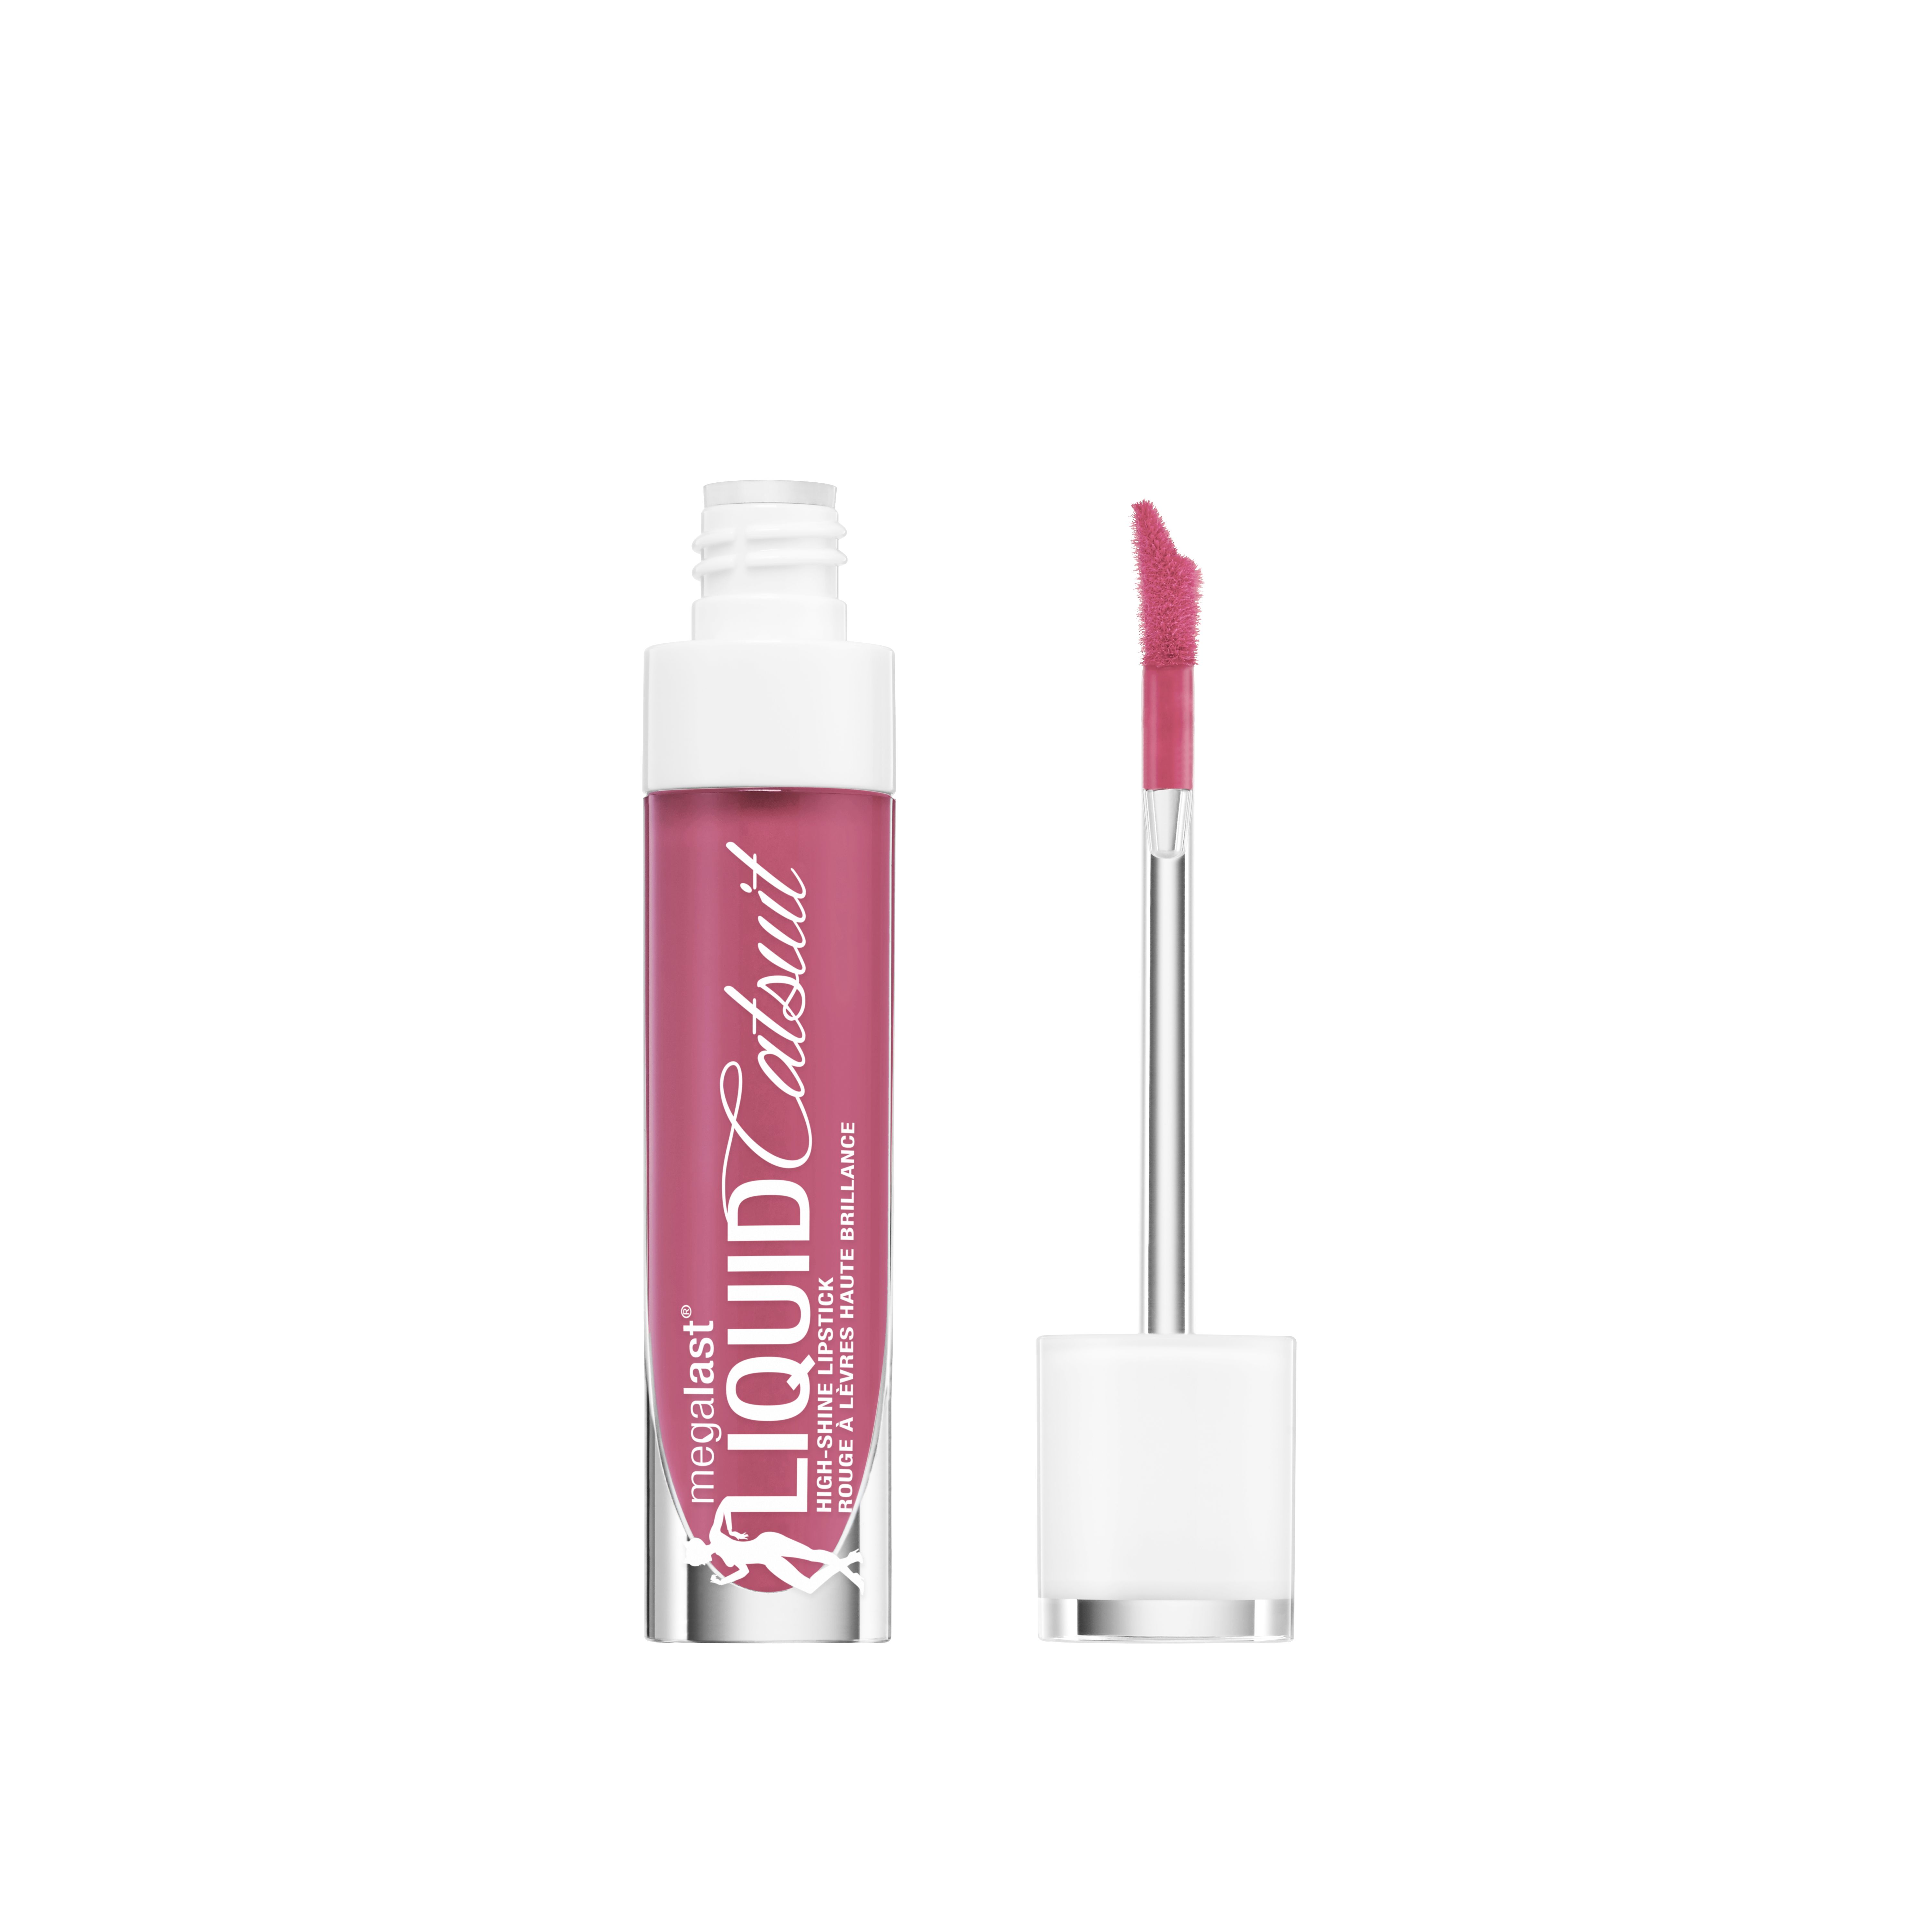 wet n wild MegaLast Liquid Catsuit High-Shine Lipstick, Caught You Bare-Naked | Walmart (US)